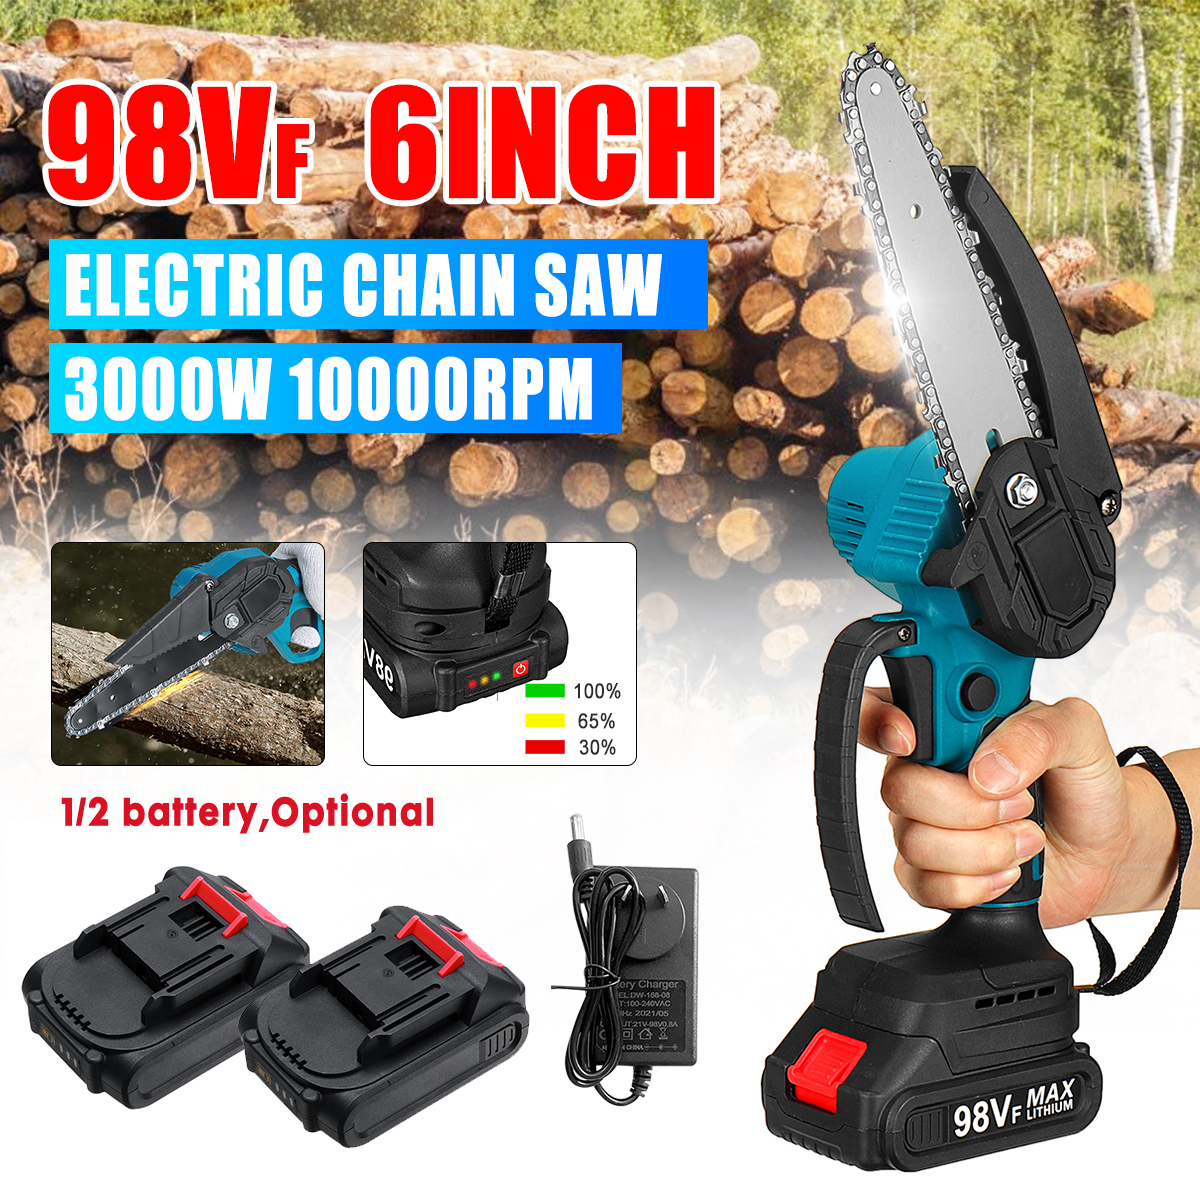 6-Inch-98VF-3000W-10000rpm-Mini-Electric-Chainsaw-Battery-Indicator-Portable-Woodworking-Wood-Cutter-1858363-1